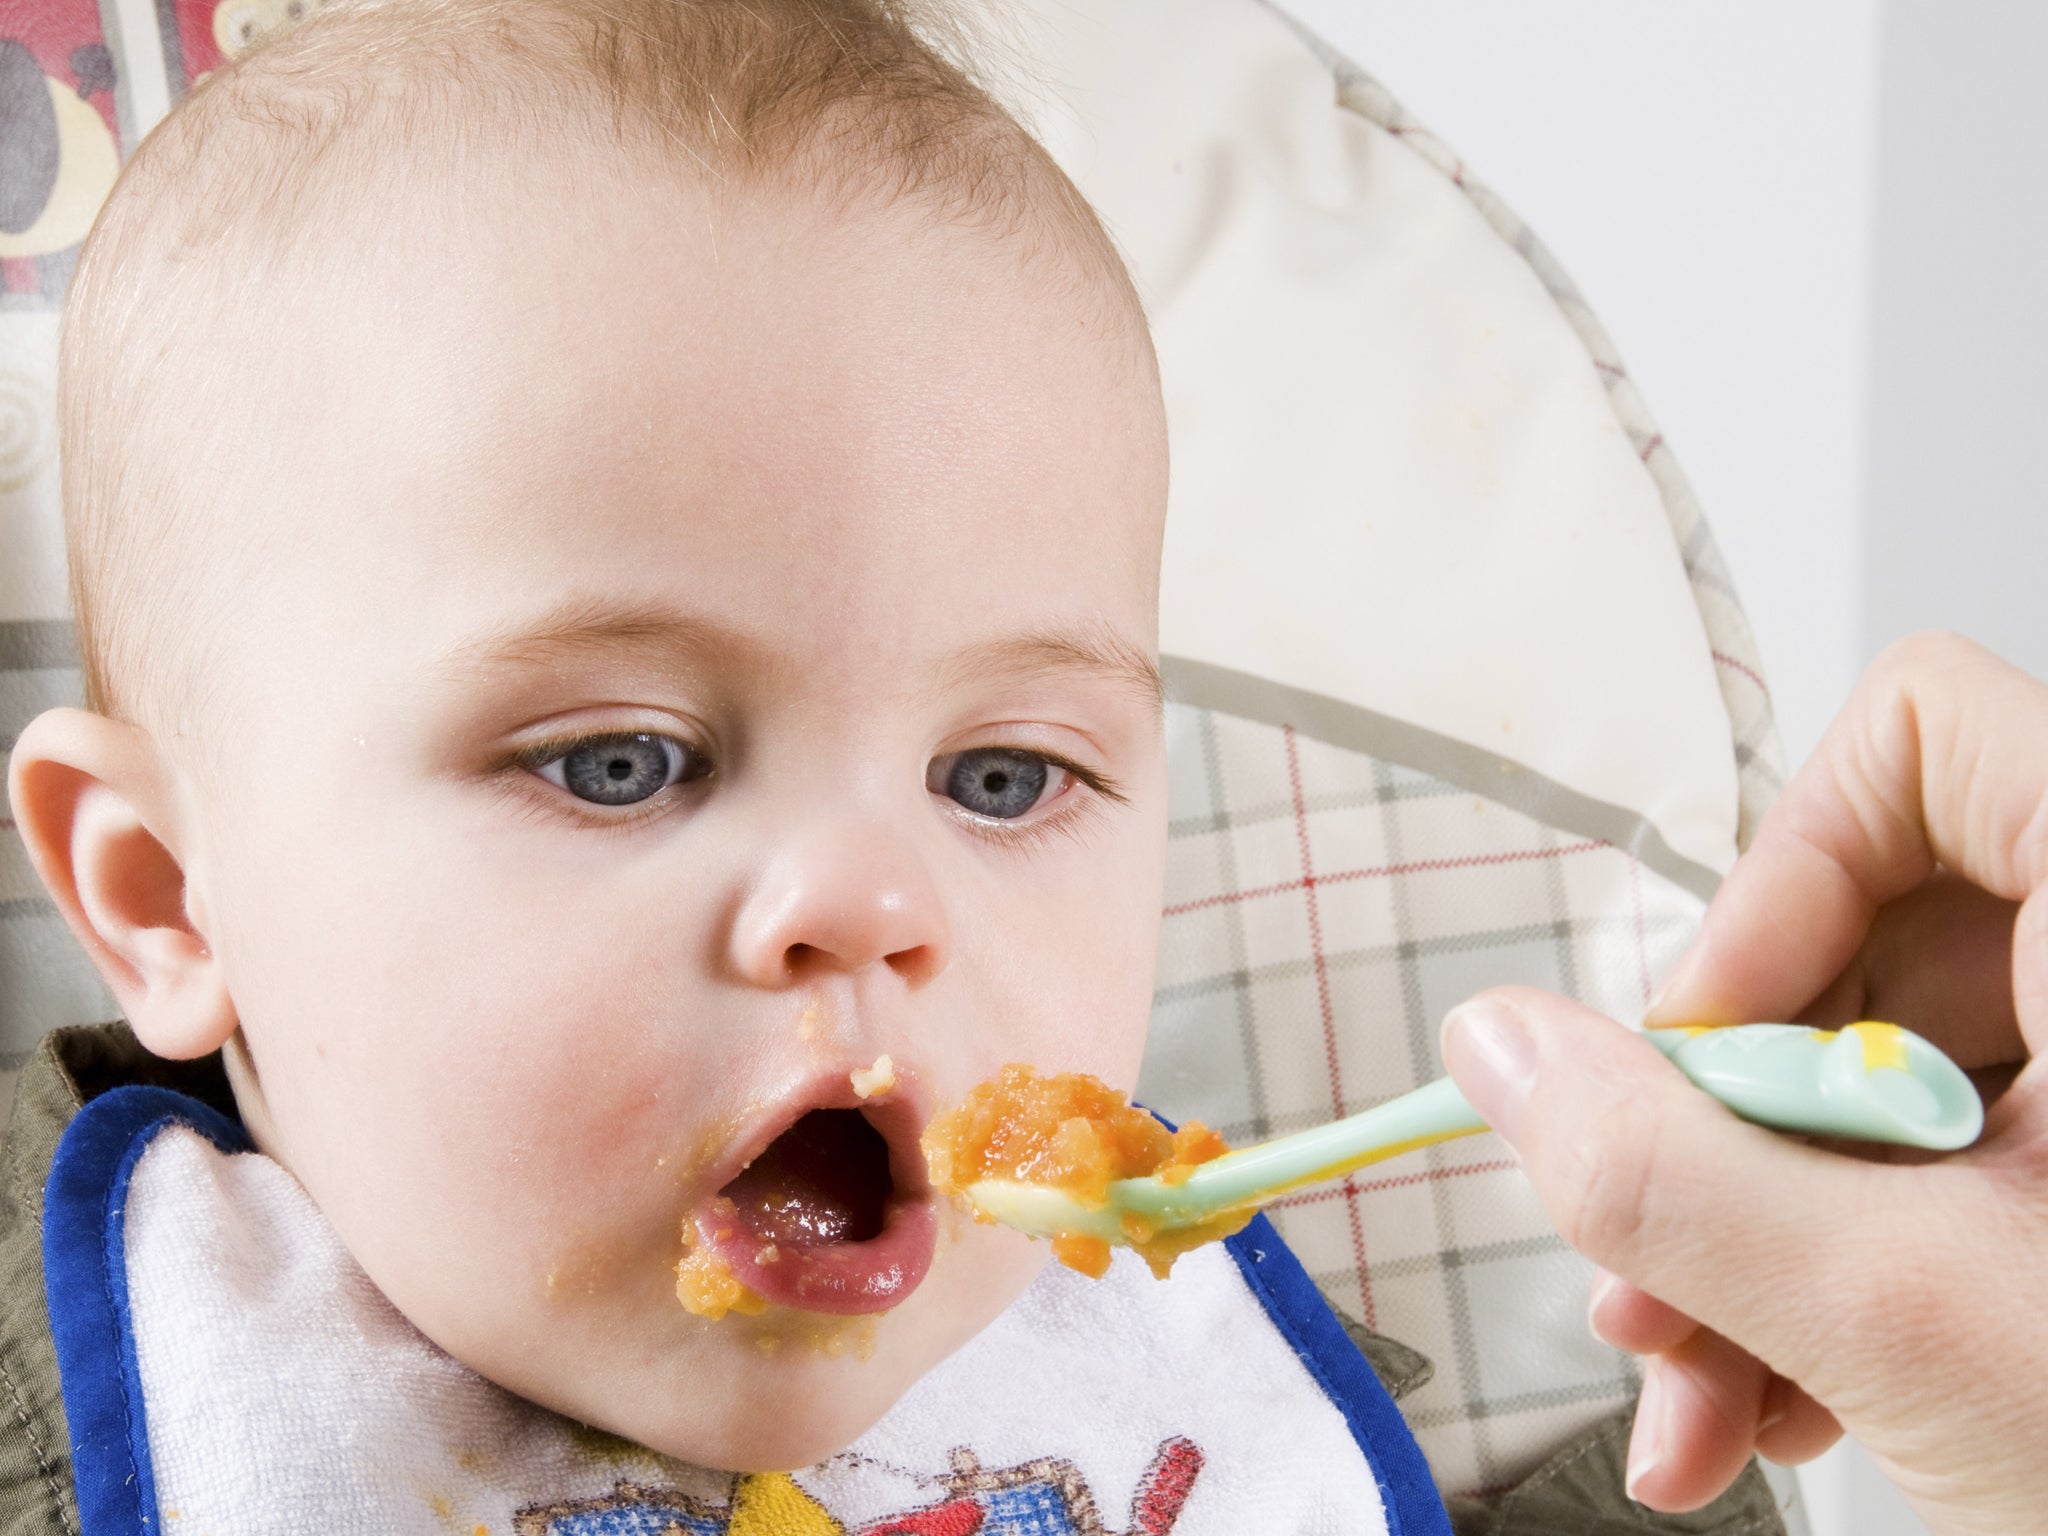 Babies and their palates can learn very early on about good food, even before their first mouthful